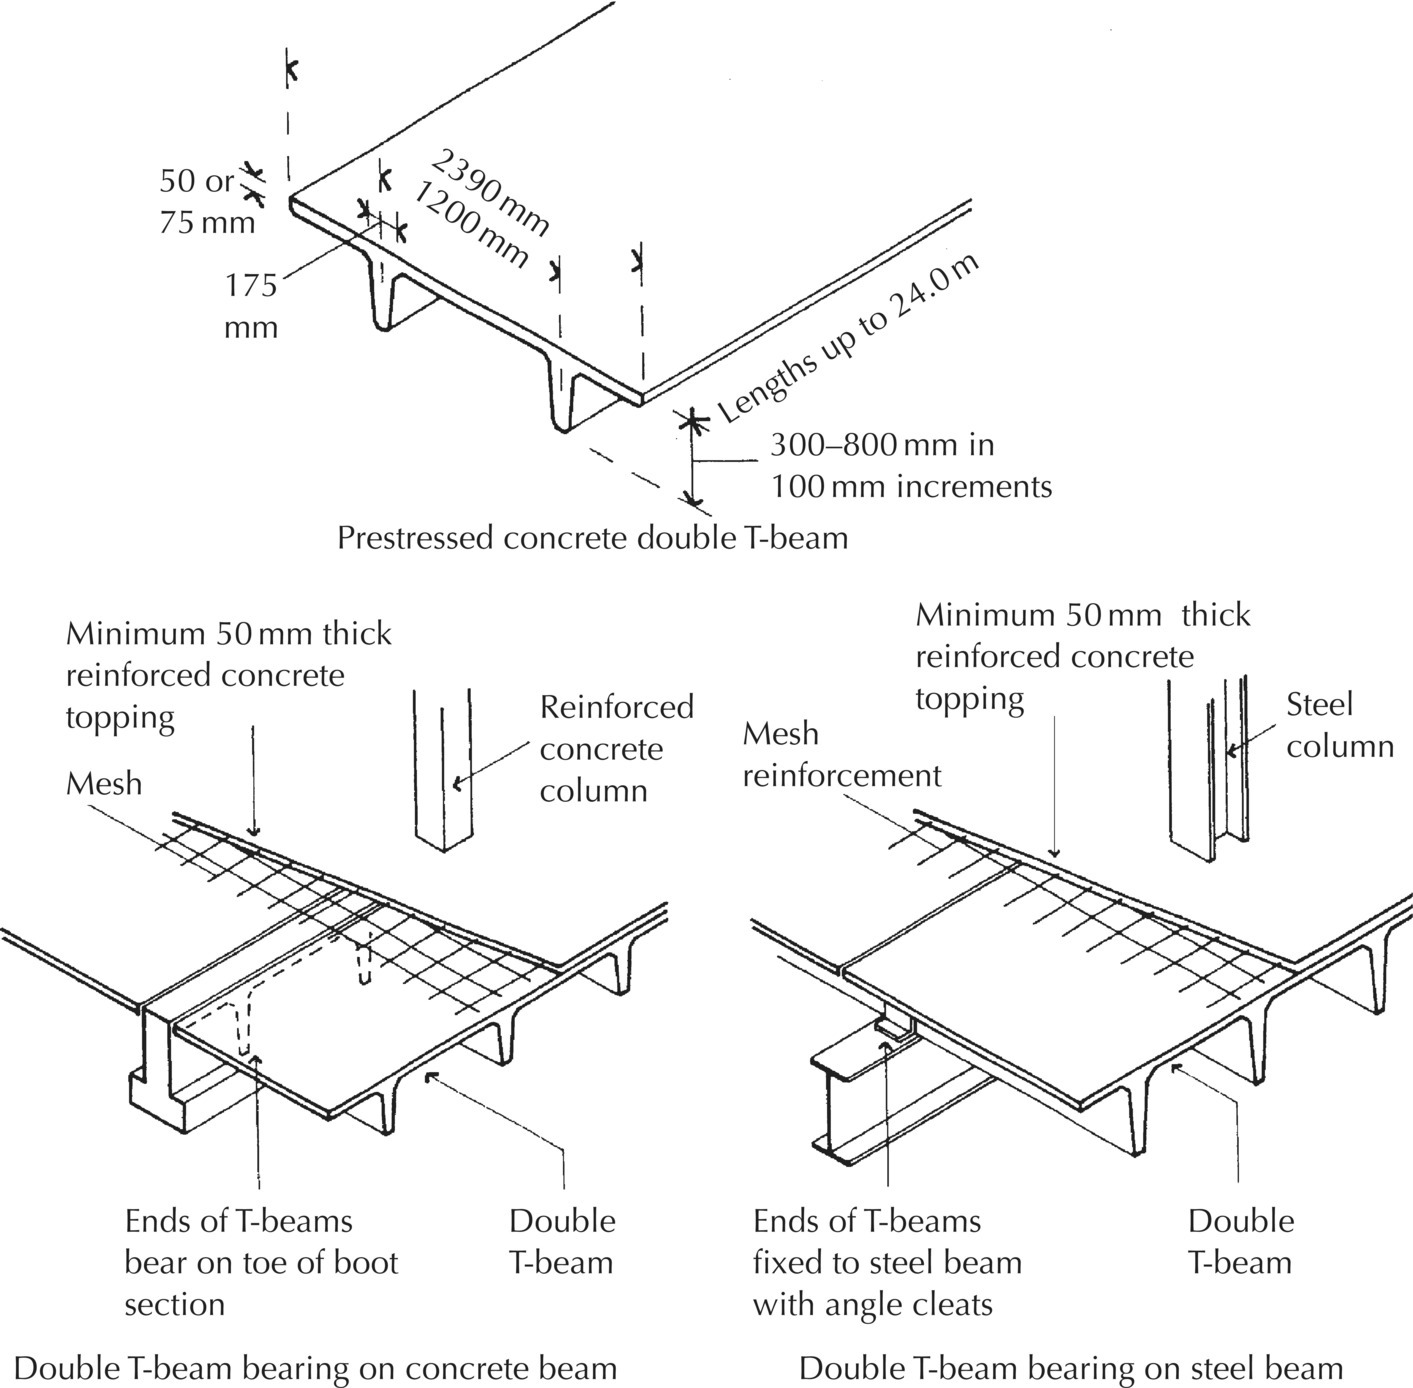 3 Diagrams of prestressed concrete double T-beam (top) and double T-beam bearing on concrete beam (bottom left) and on steel beam (bottom right), with arrows to steel column, mesh, mesh reinforcement, etc.